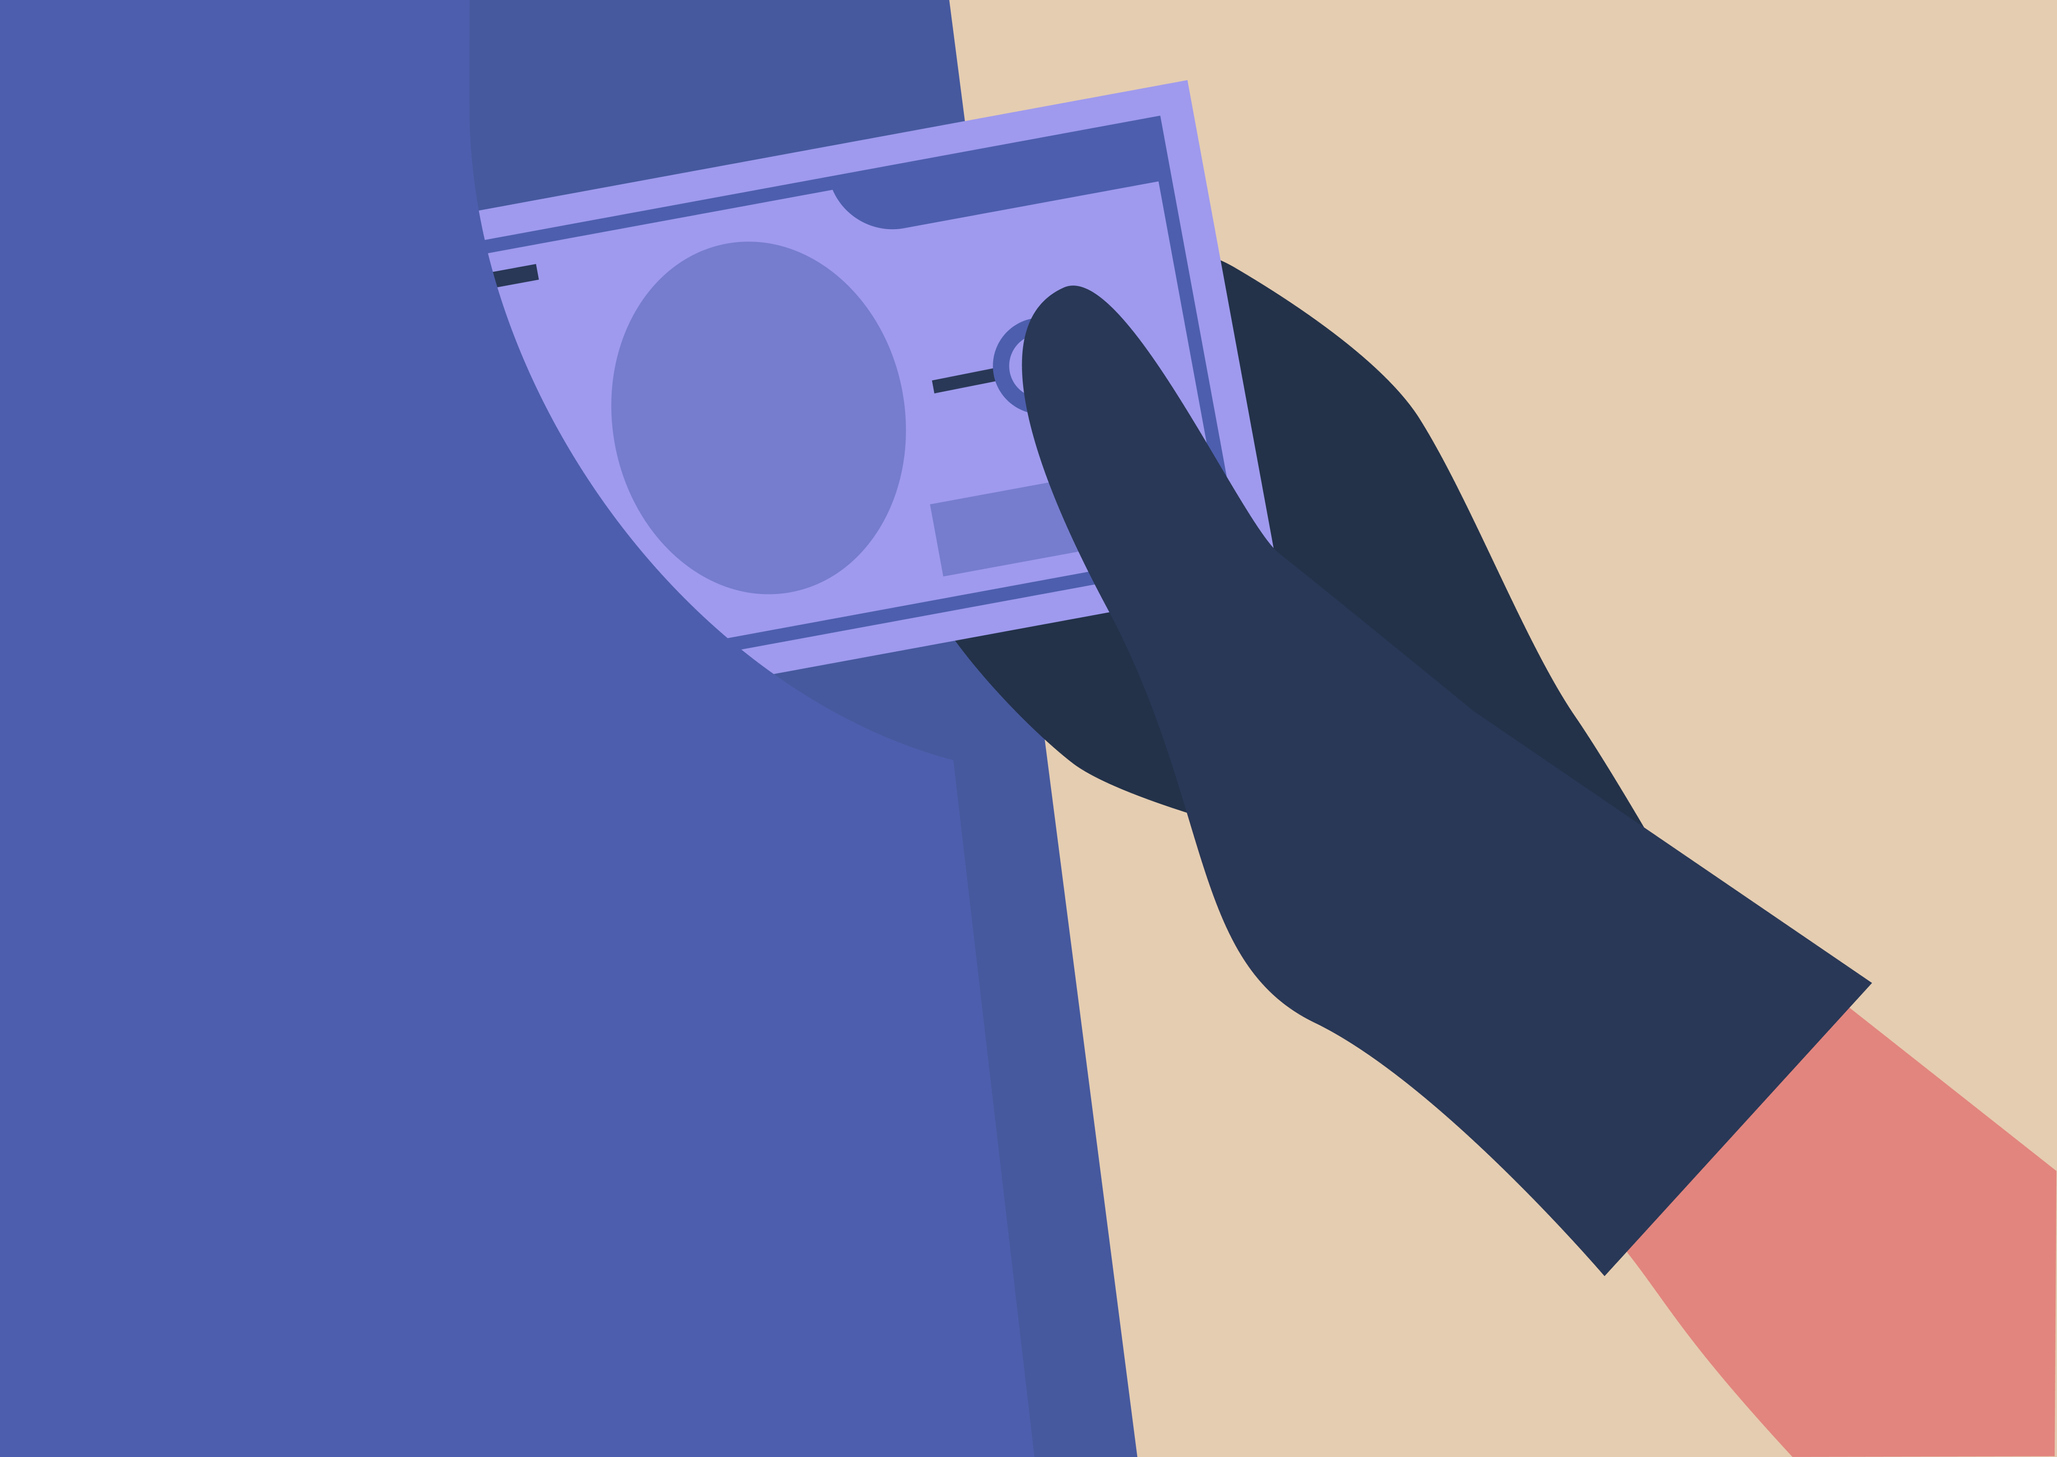 Animation of a gloved hand taking money out of someone's pocket.